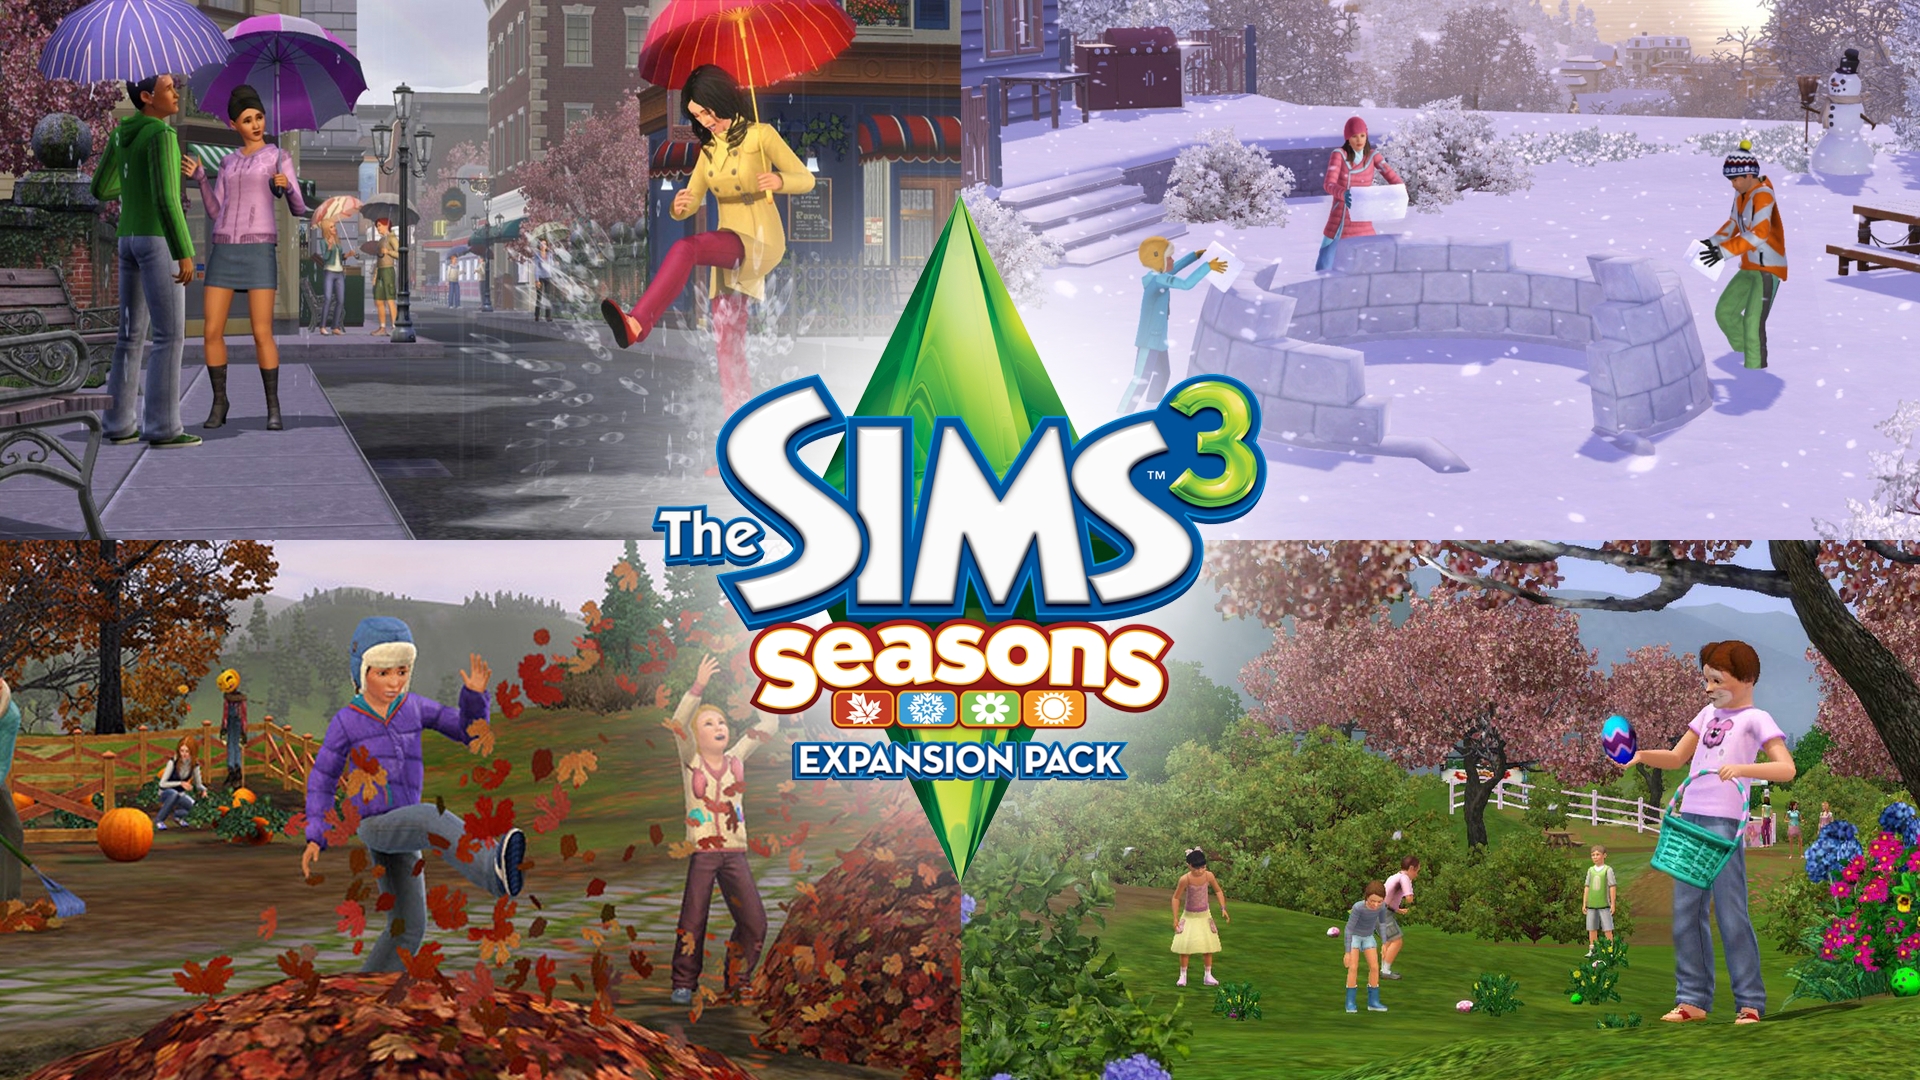 The Sims 3: Generations for free on Steam